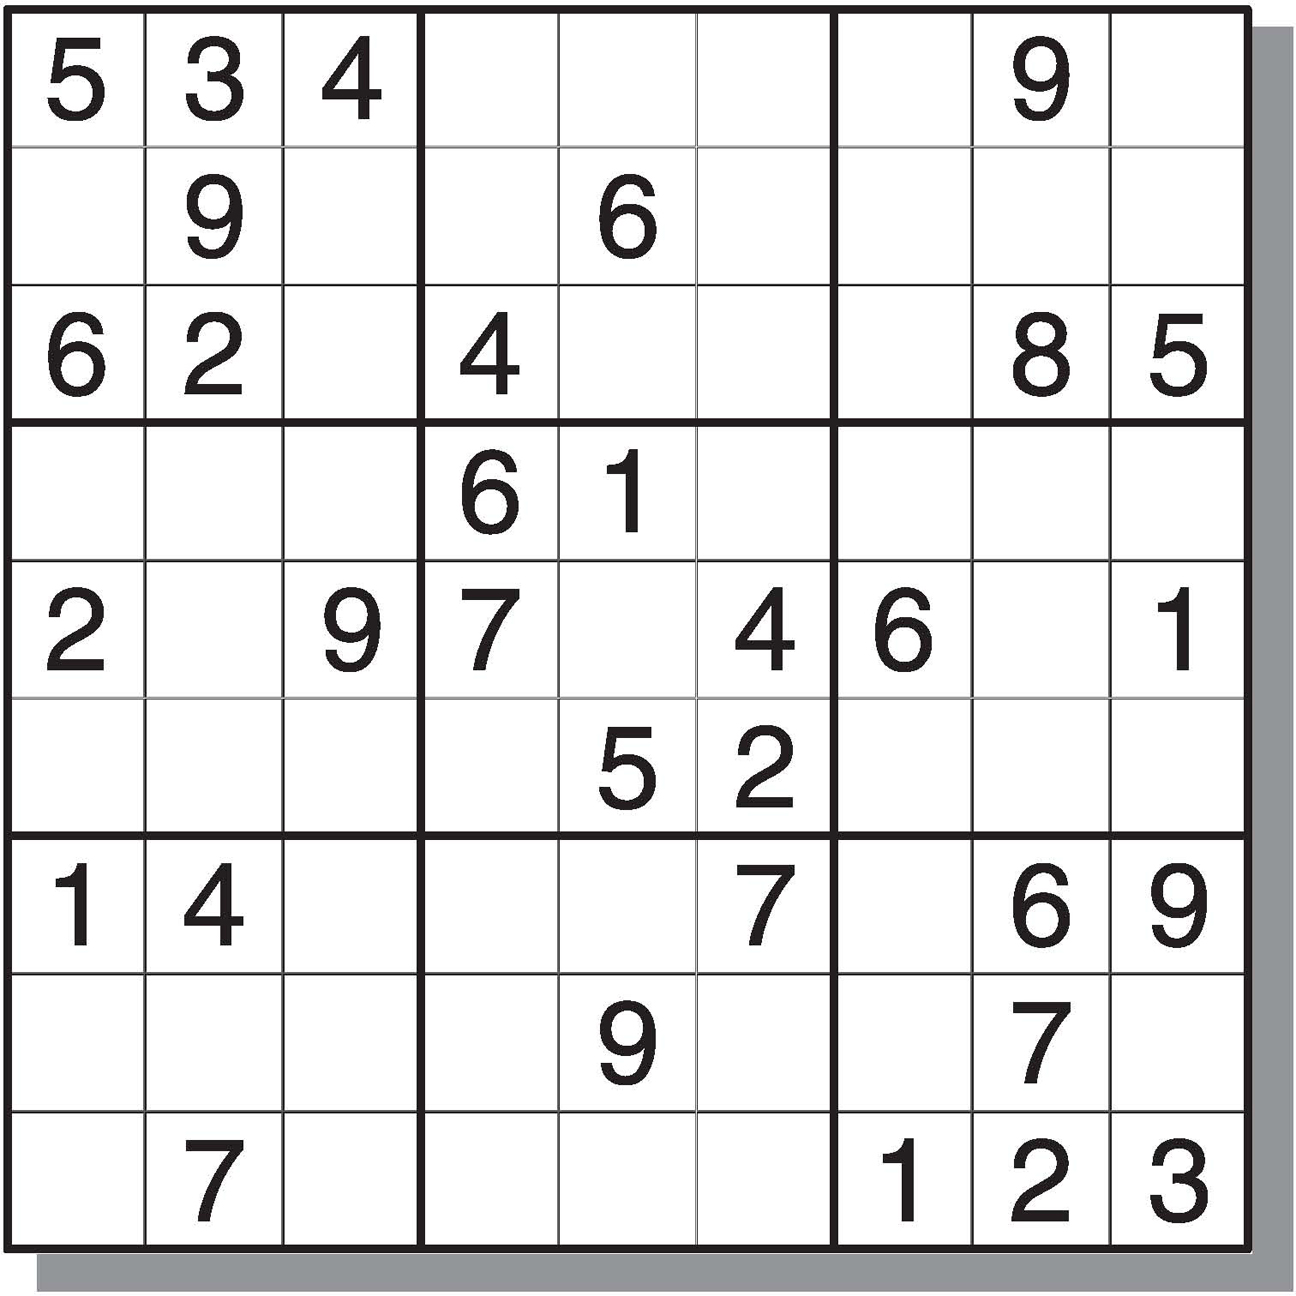 8-best-images-of-printable-sudoku-with-answers-free-medium-printable-sudoku-puzzles-sudoku